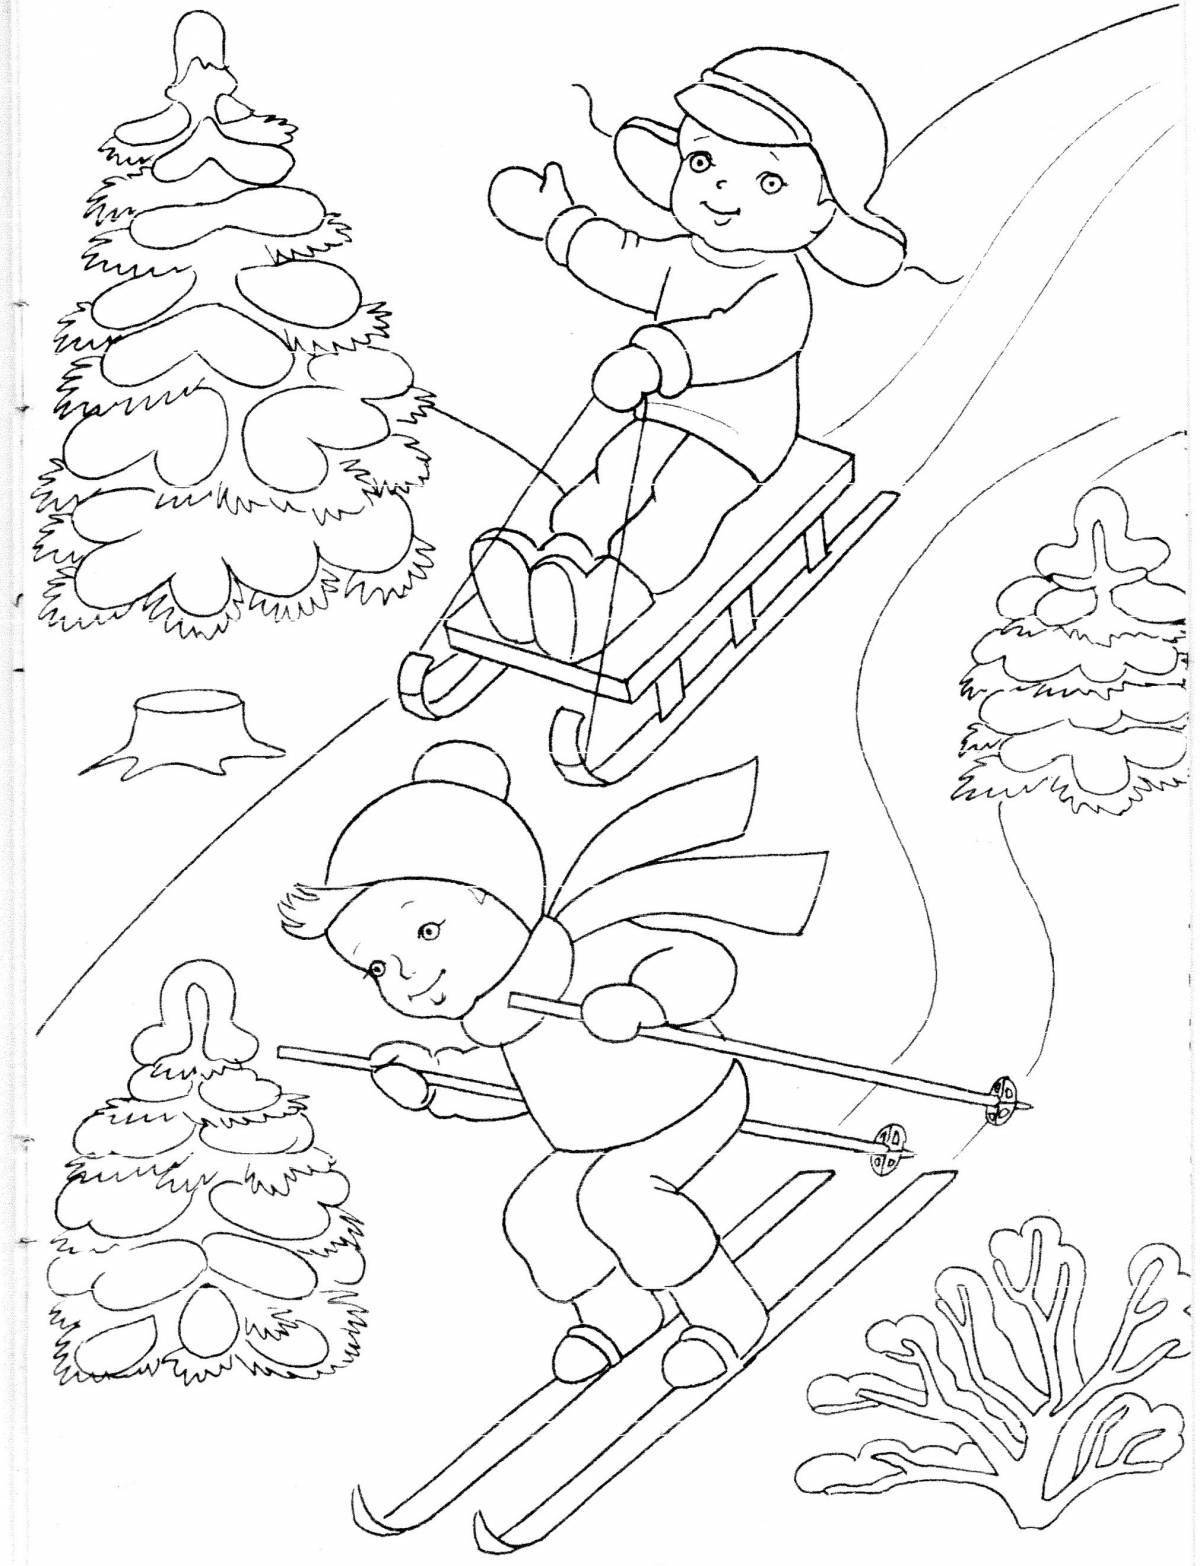 Colorful winter fun coloring book for kids